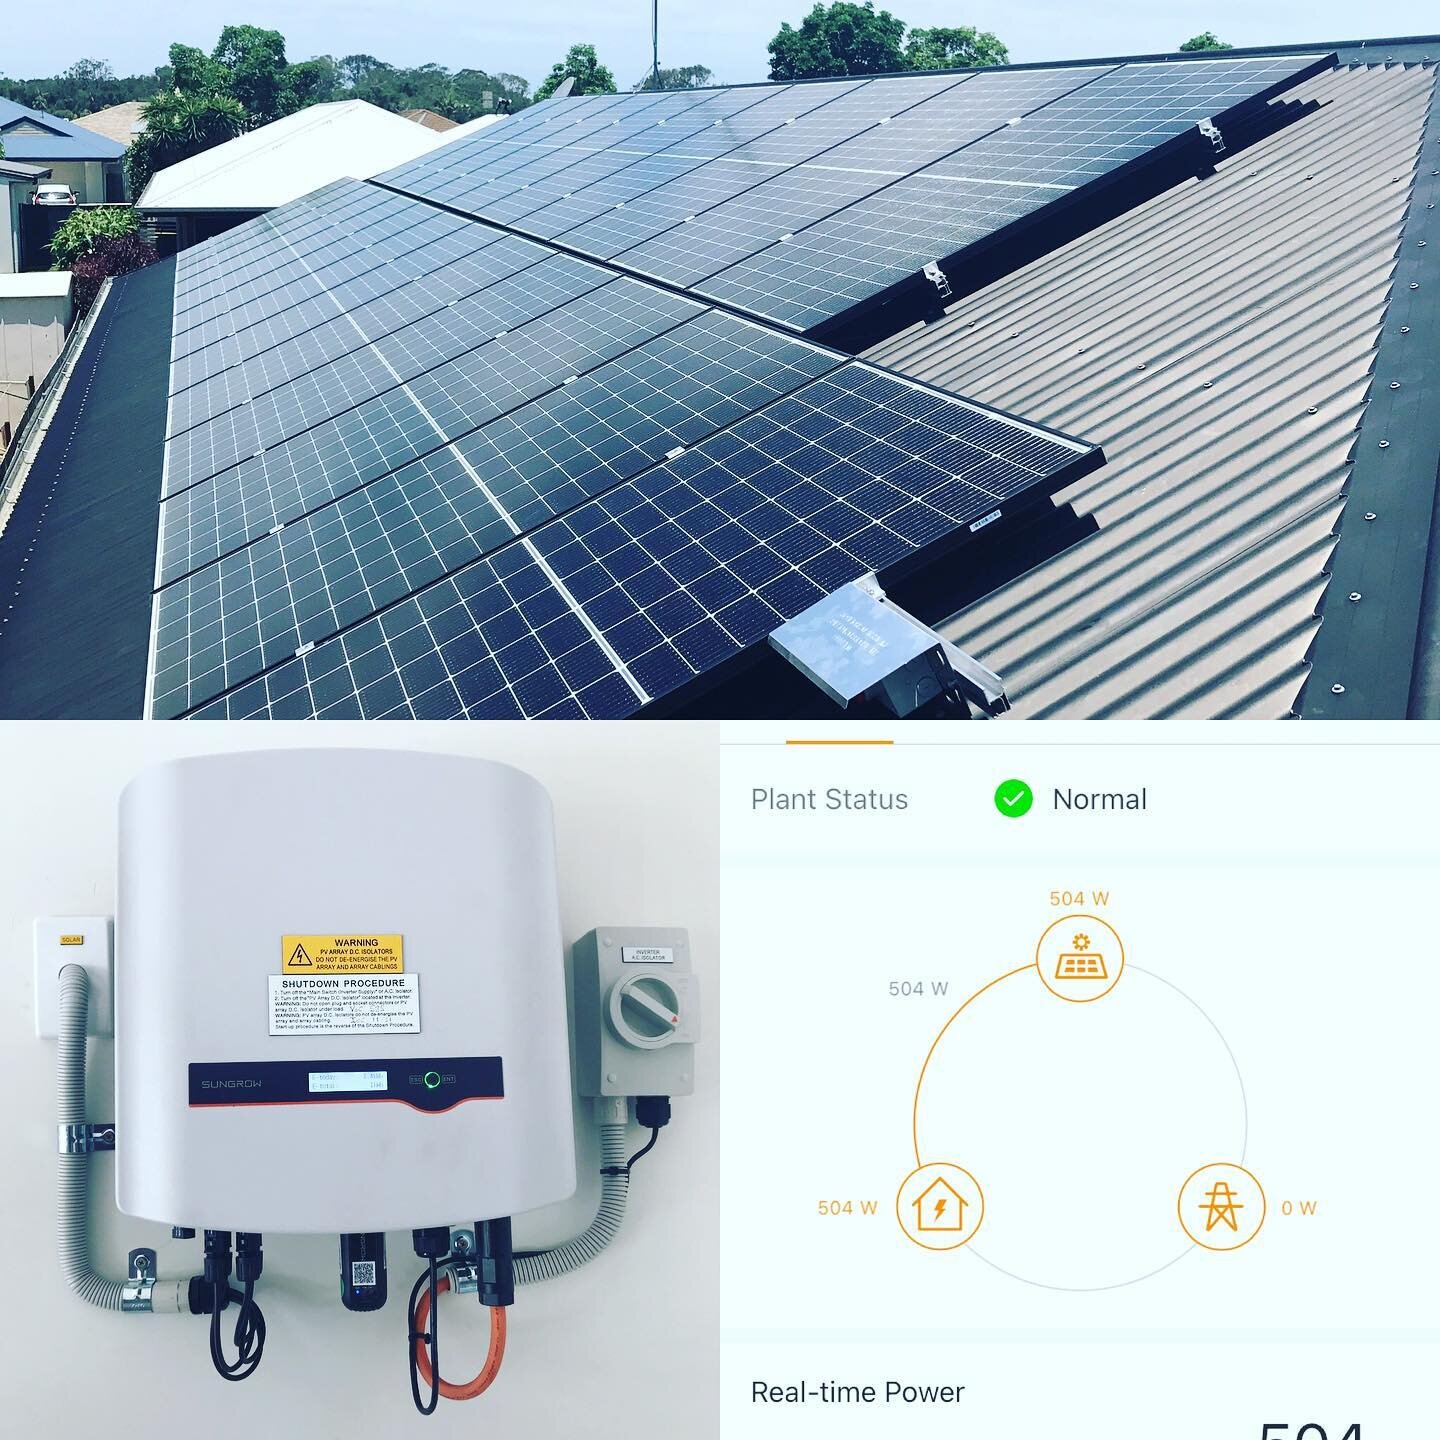 Goodbye power bills !!! 

This an 8.51 kw system we did just before Christmas, it consists of 23 x 370 Phono panels (15 year standard warranty) and a Sungrow 8 kw Premium Inverter (10 year standard warranty) 
All our systems are set up so we can moni